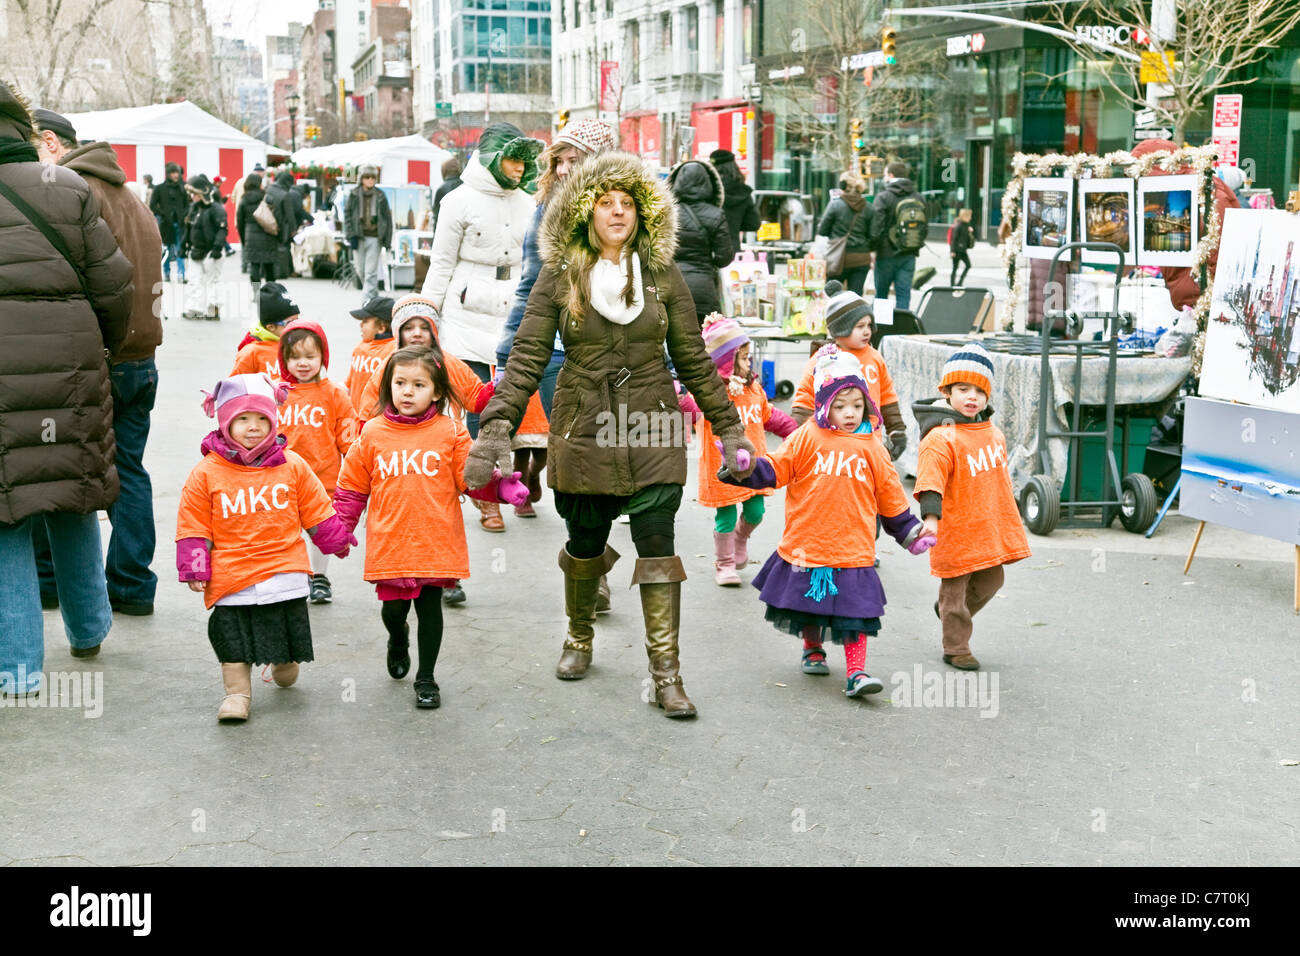 group of preschool daycare boys & girls wearing identical orange jerseys with teachers enjoy Christmas outing to Union Square Stock Photo